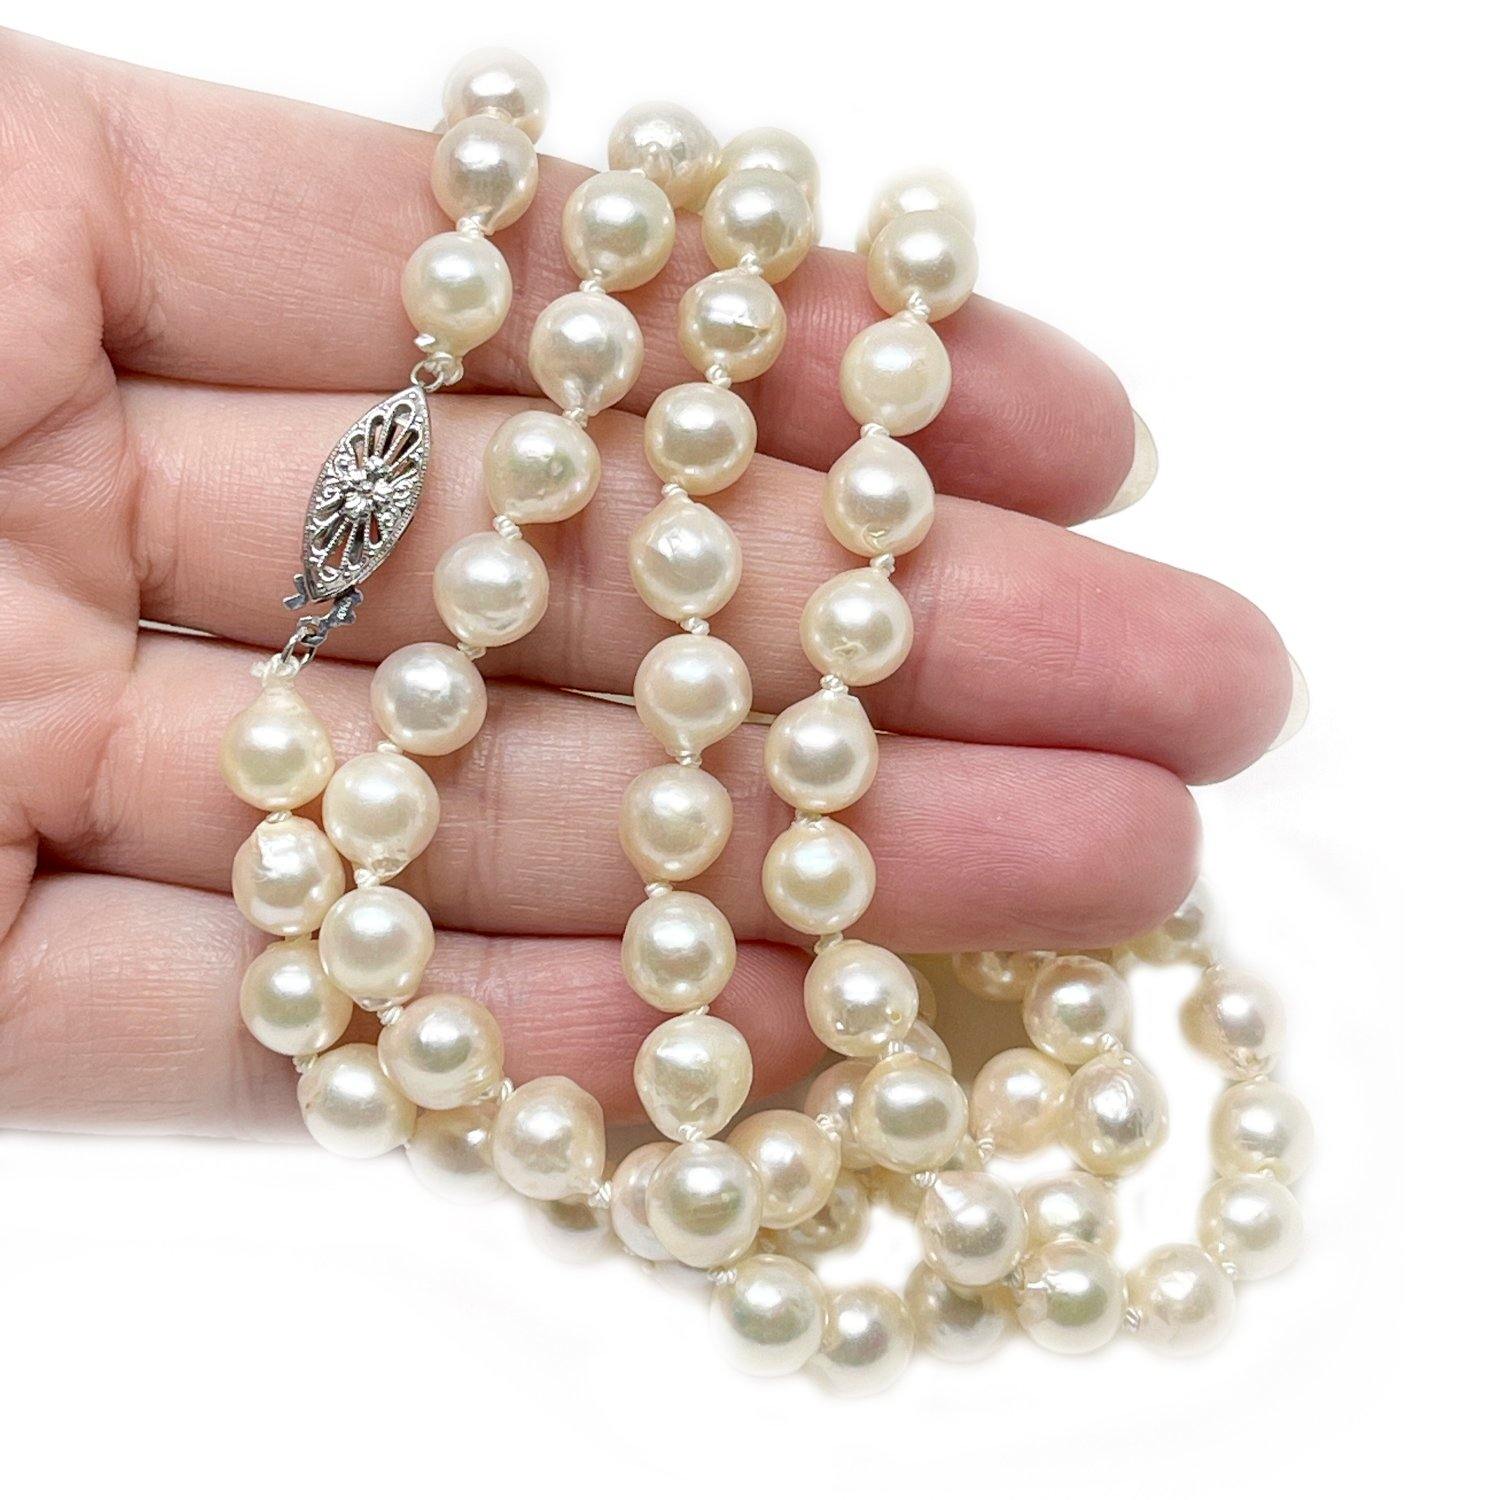 Baroque Vintage Japanese Cultured Akoya Pearl Strand - 10K White Gold 35 Inch